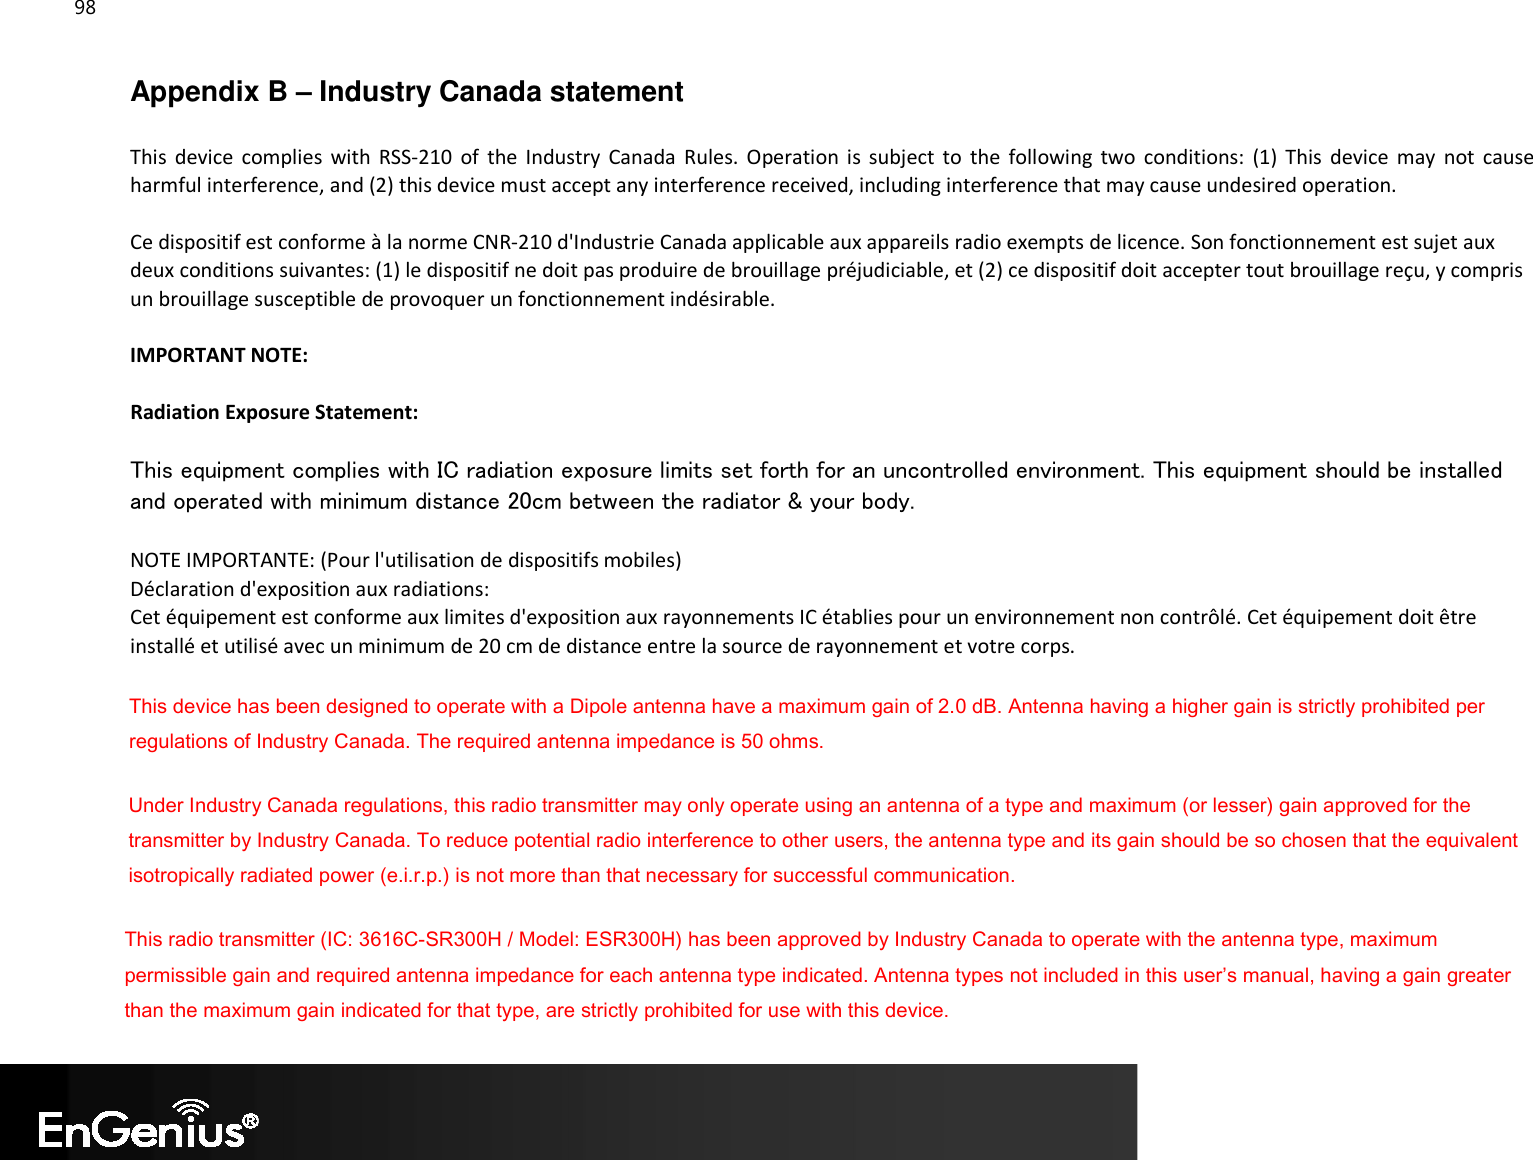 98  Appendix B – Industry Canada statement This  device  complies  with  RSS-210  of  the  Industry  Canada  Rules.  Operation  is  subject  to  the  following  two  conditions:  (1)  This  device  may  not  cause harmful interference, and (2) this device must accept any interference received, including interference that may cause undesired operation. Ce dispositif est conforme à la norme CNR-210 d&apos;Industrie Canada applicable aux appareils radio exempts de licence. Son fonctionnement est sujet aux deux conditions suivantes: (1) le dispositif ne doit pas produire de brouillage préjudiciable, et (2) ce dispositif doit accepter tout brouillage reçu, y compris un brouillage susceptible de provoquer un fonctionnement indésirable. IMPORTANT NOTE: Radiation Exposure Statement: This equipment complies with IC radiation exposure limits set forth for an uncontrolled environment. This equipment should be installed and operated with minimum distance 20cm between the radiator &amp; your body. NOTE IMPORTANTE: (Pour l&apos;utilisation de dispositifs mobiles) Déclaration d&apos;exposition aux radiations: Cet équipement est conforme aux limites d&apos;exposition aux rayonnements IC établies pour un environnement non contrôlé. Cet équipement doit être installé et utilisé avec un minimum de 20 cm de distance entre la source de rayonnement et votre corps. This device has been designed to operate with a Dipole antenna have a maximum gain of 2.0 dB. Antenna having a higher gain is strictly prohibited per regulations of Industry Canada. The required antenna impedance is 50 ohms. Under Industry Canada regulations, this radio transmitter may only operate using an antenna of a type and maximum (or lesser) gain approved for the transmitter by Industry Canada. To reduce potential radio interference to other users, the antenna type and its gain should be so chosen that the equivalent isotropically radiated power (e.i.r.p.) is not more than that necessary for successful communication. This radio transmitter (IC: 3616C-SR300H / Model: ESR300H) has been approved by Industry Canada to operate with the antenna type, maximum permissible gain and required antenna impedance for each antenna type indicated. Antenna types not included in this user’s manual, having a gain greater than the maximum gain indicated for that type, are strictly prohibited for use with this device. 